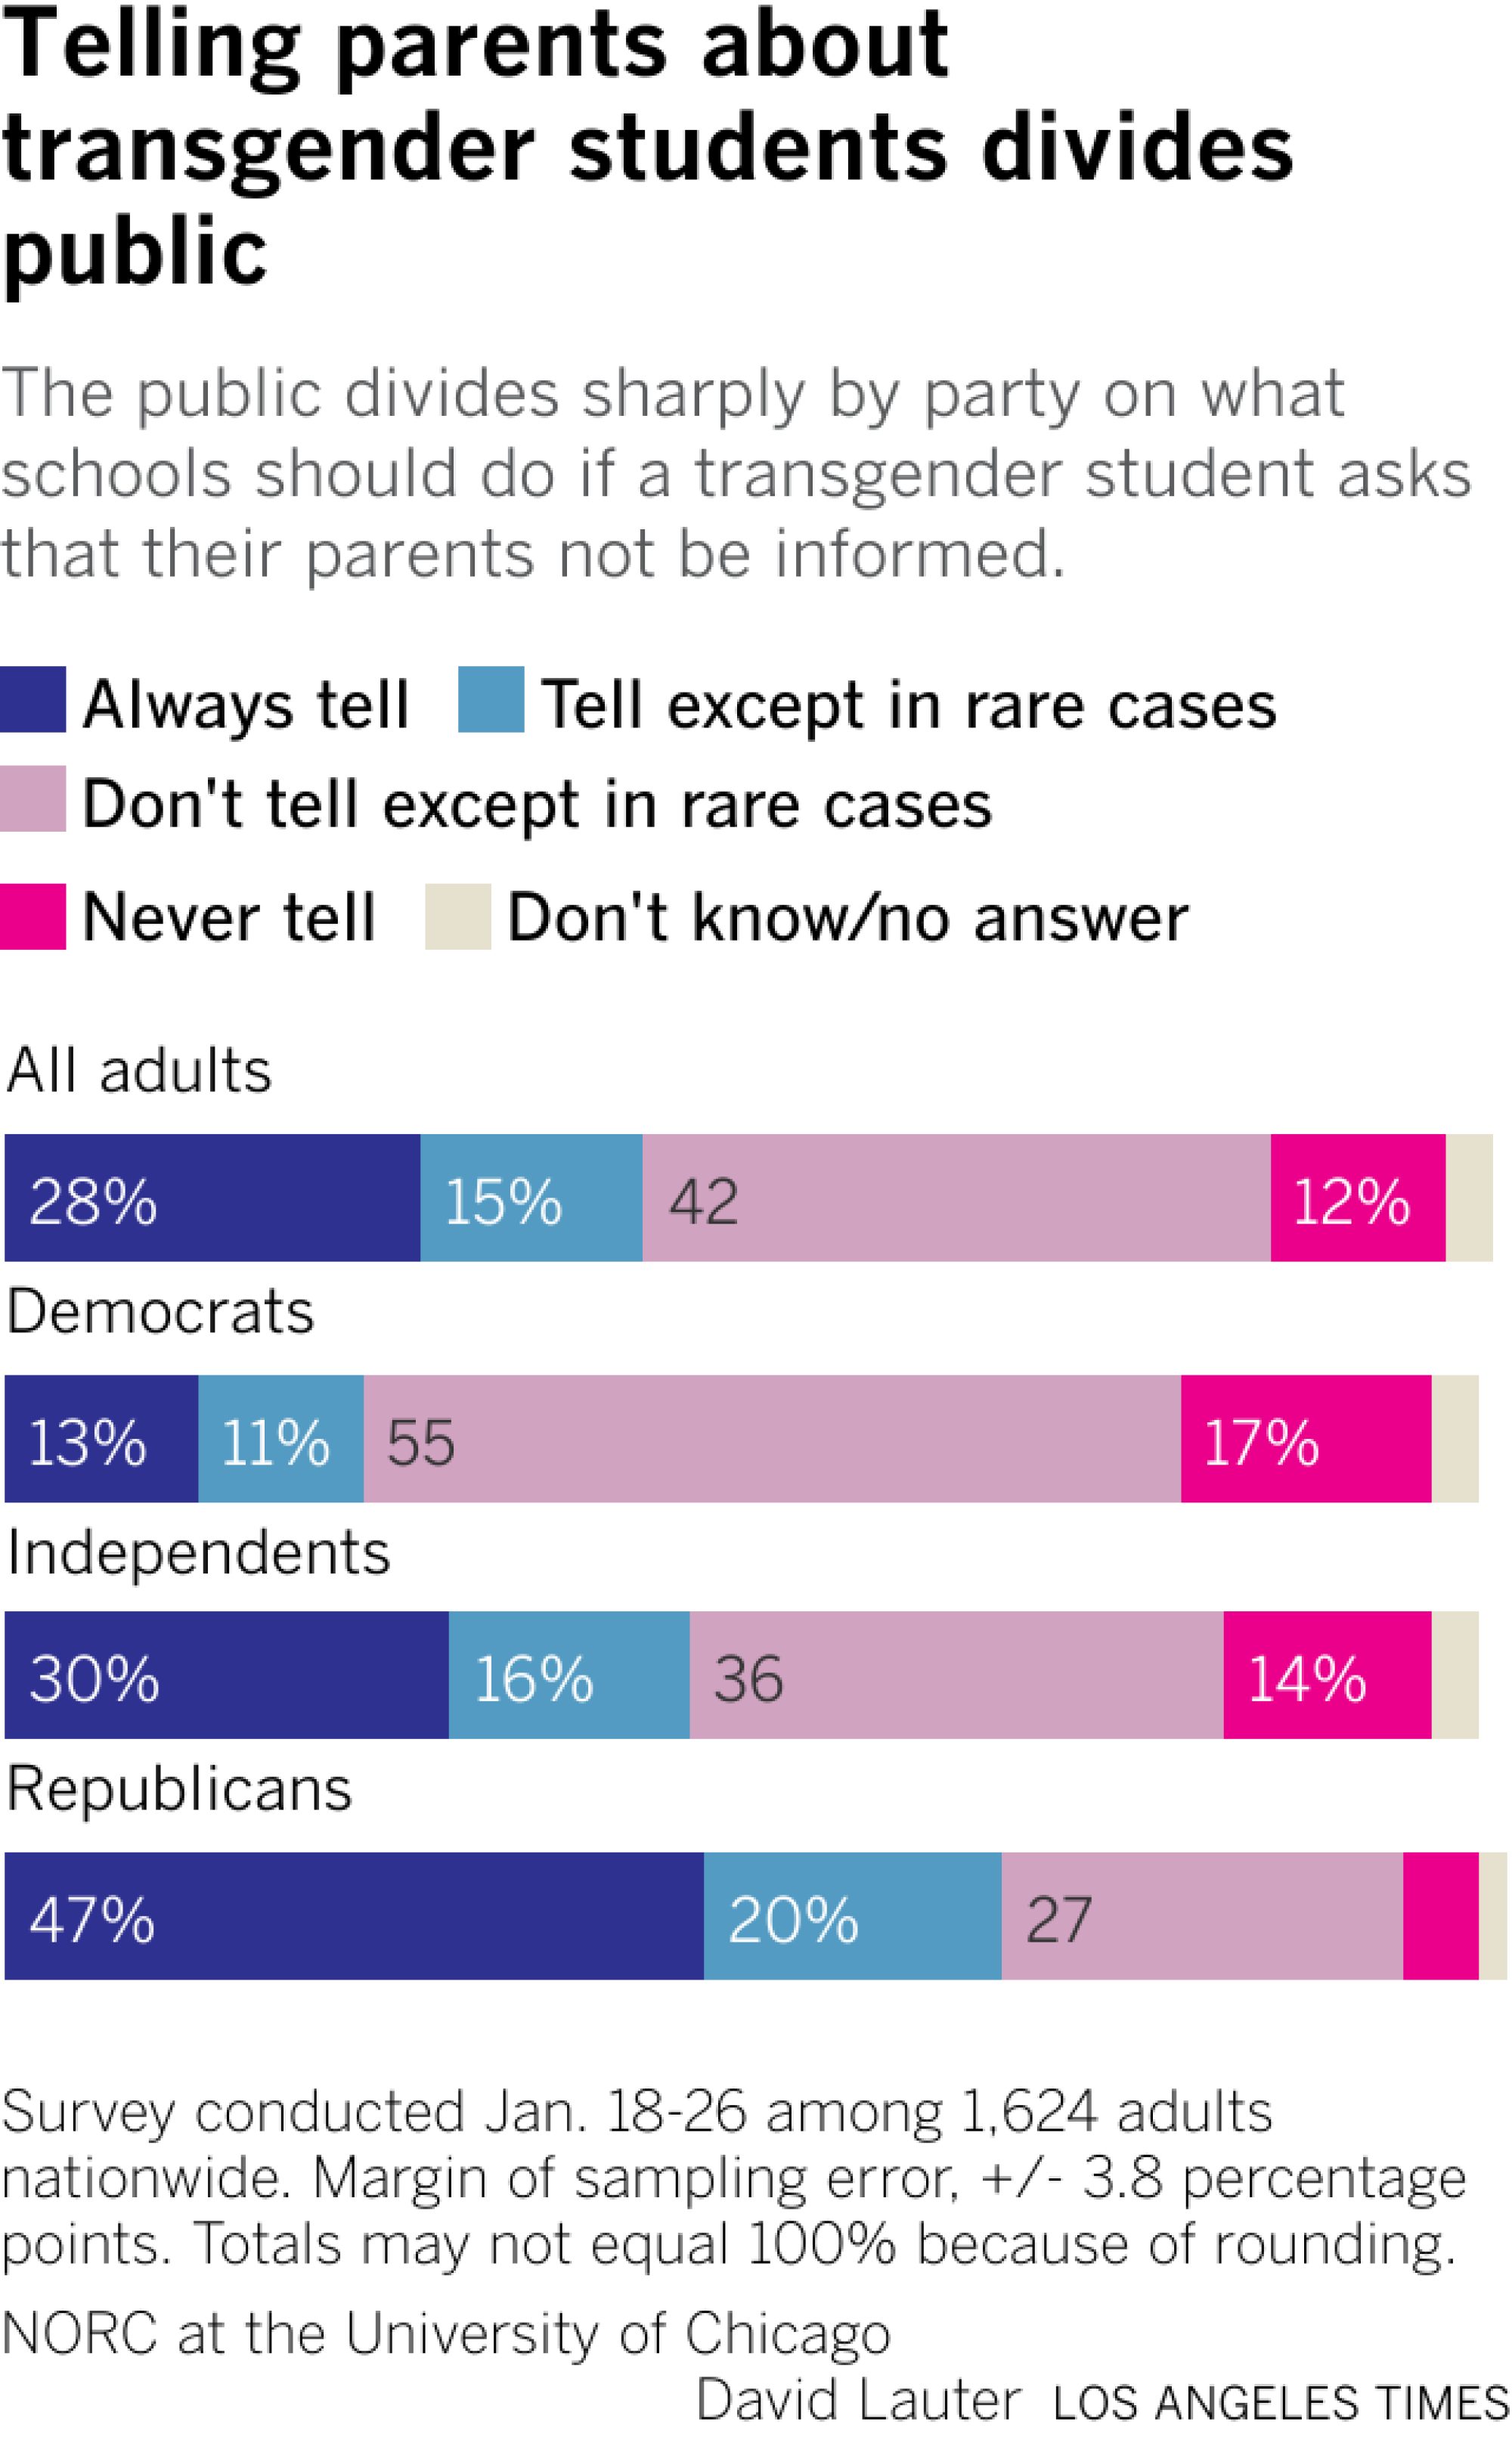 Bar chart shows American adults, broken down by party, and their answers to the question of whether schools should inform parents about a transgender student if the student asks them not to.